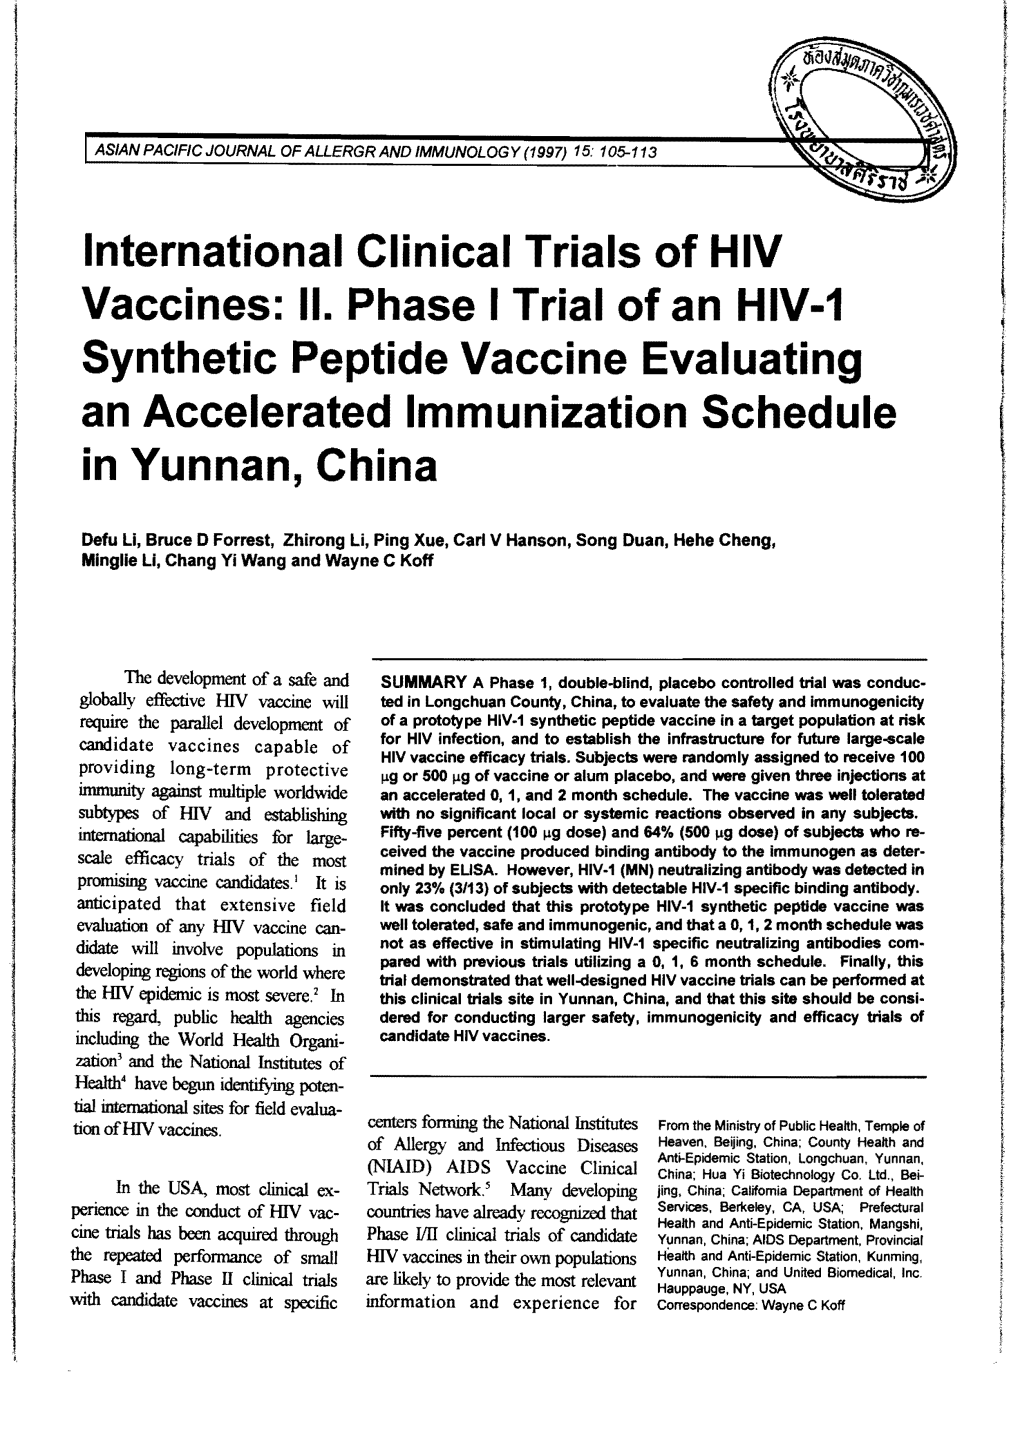 International Clinical Trials of HIV Vaccines: II